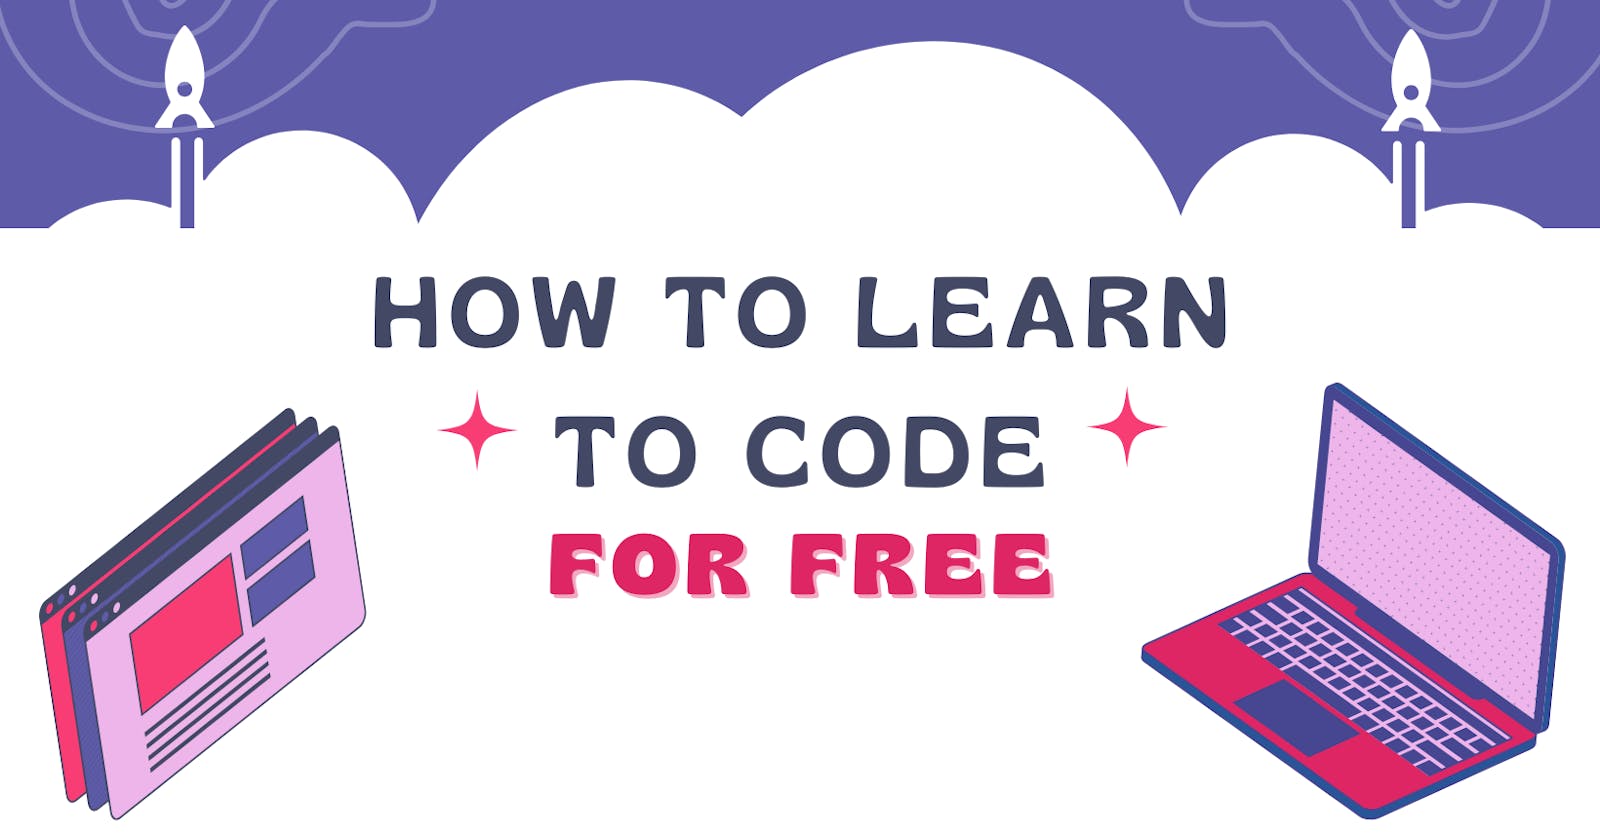 How To Learn To Code For Free